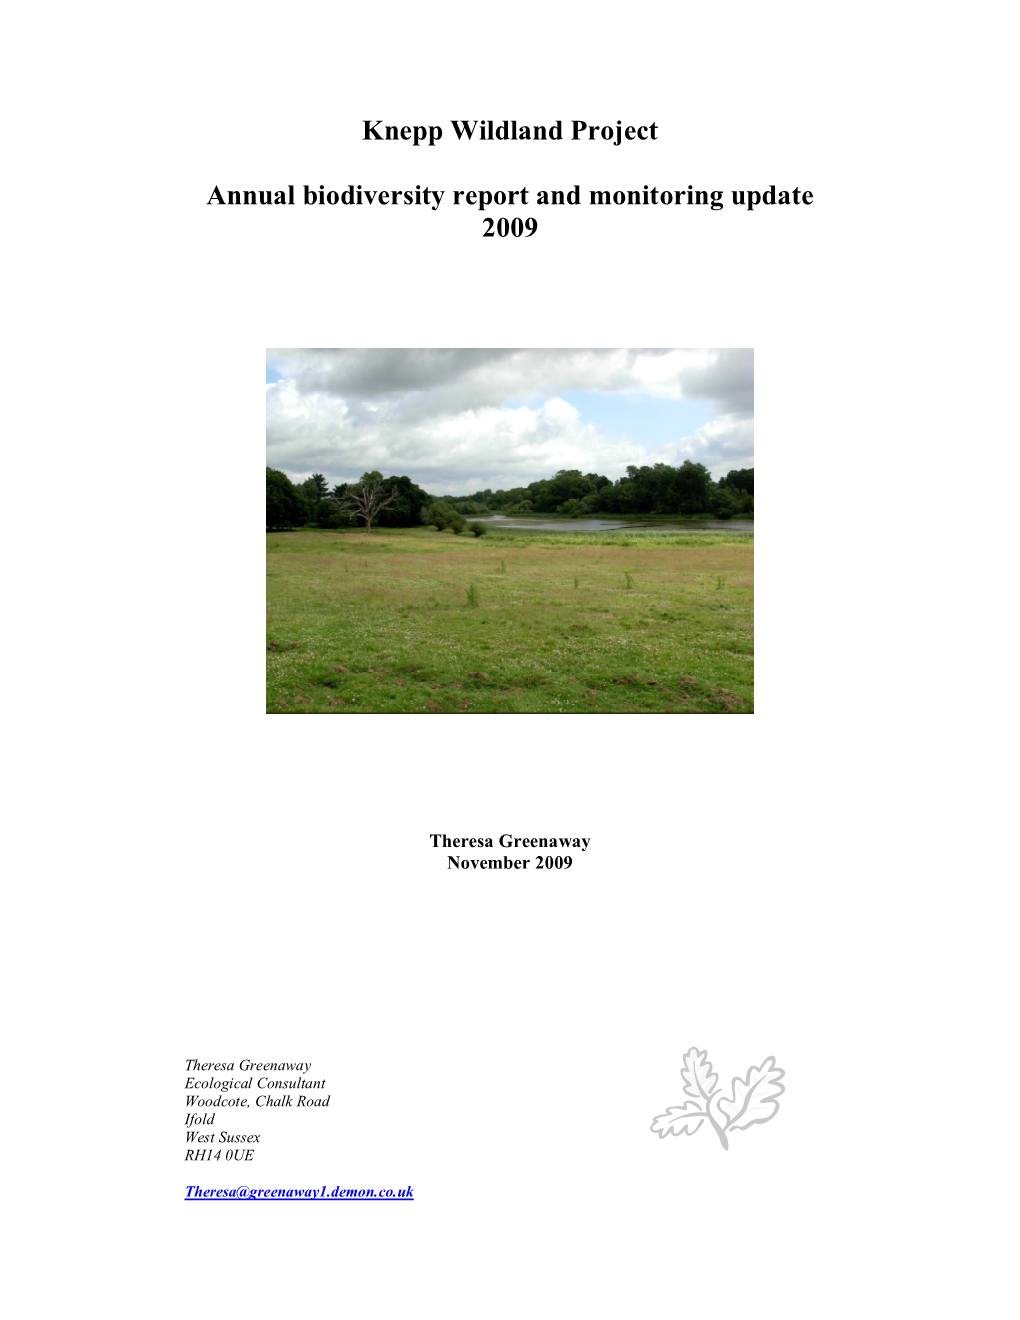 Knepp Wildland Project Annual Biodiversity Report and Monitoring